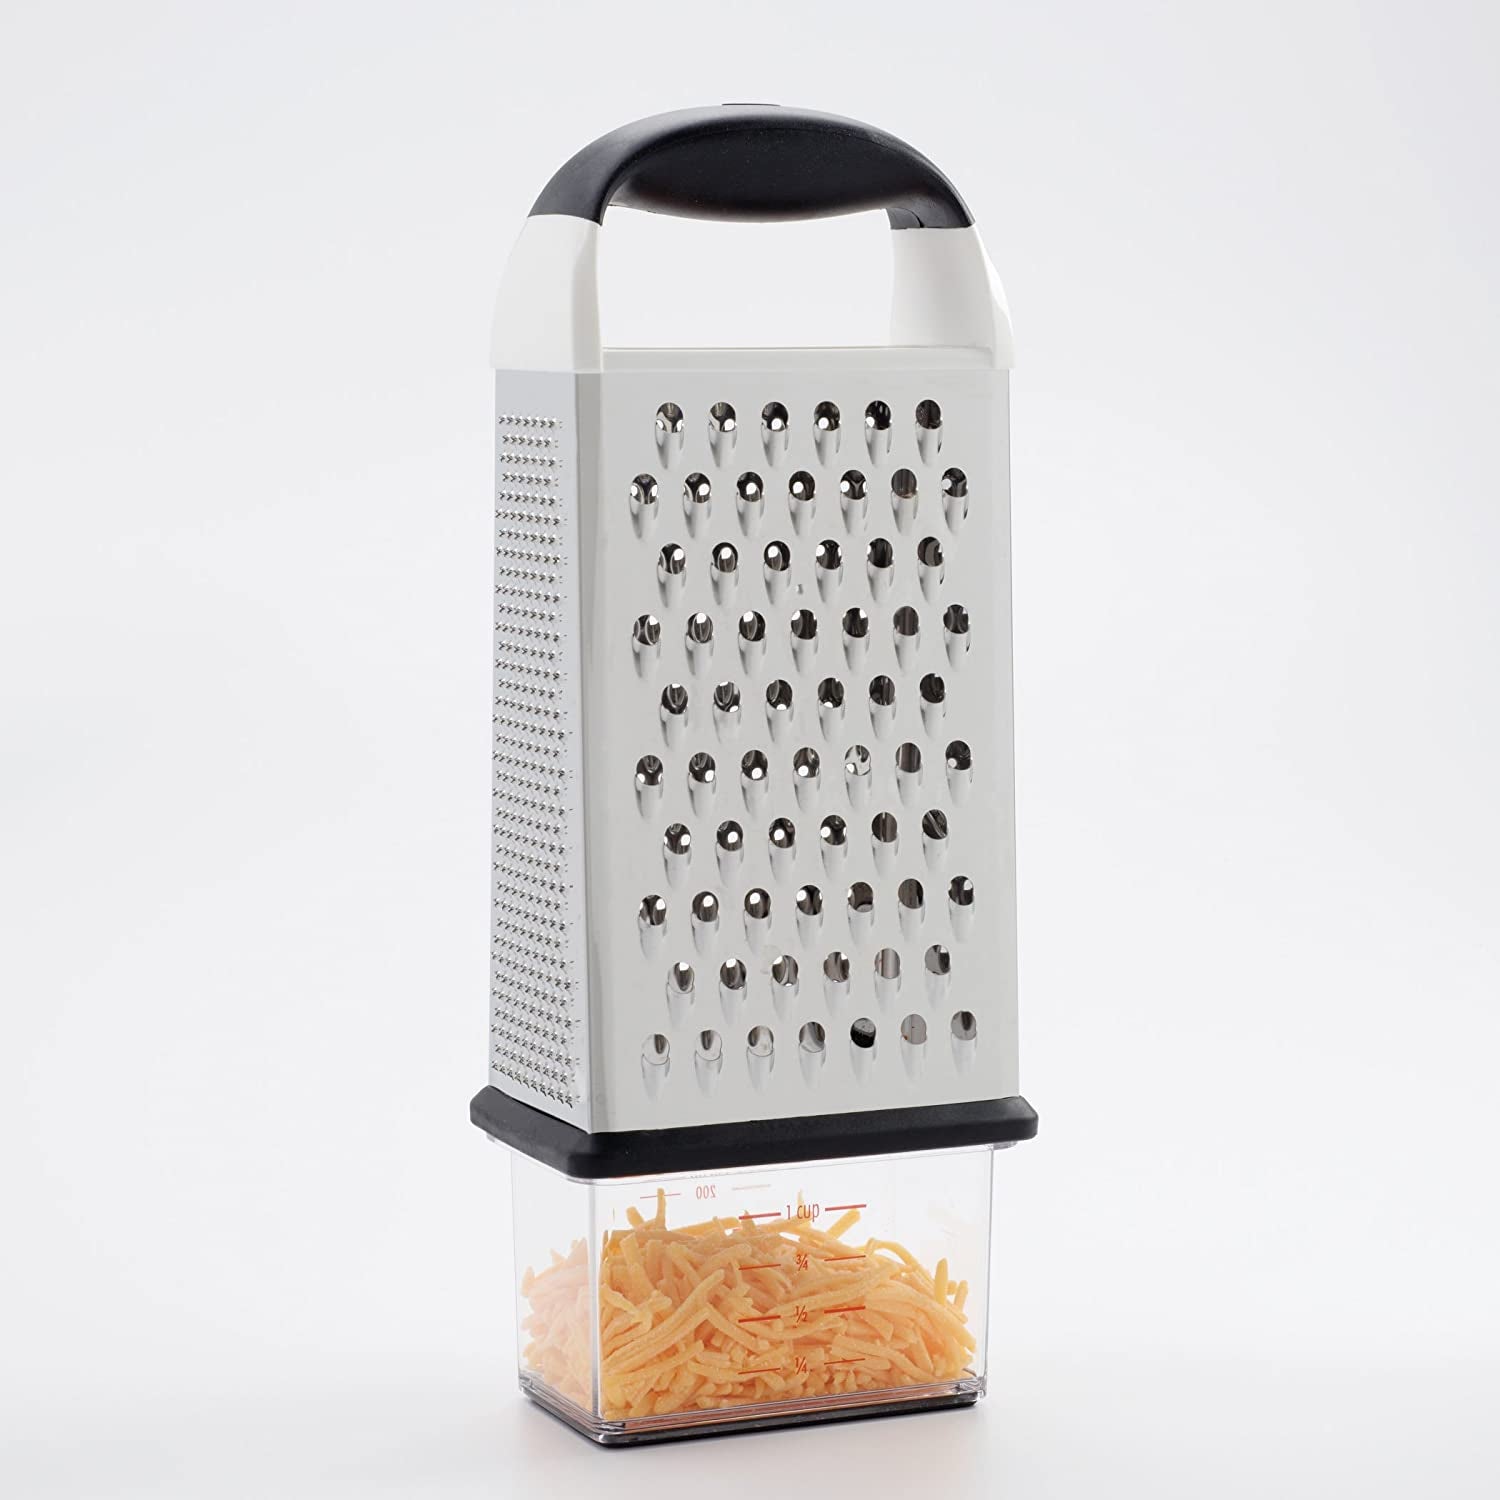 a product photo of the grater on top of the measuring cup it comes with